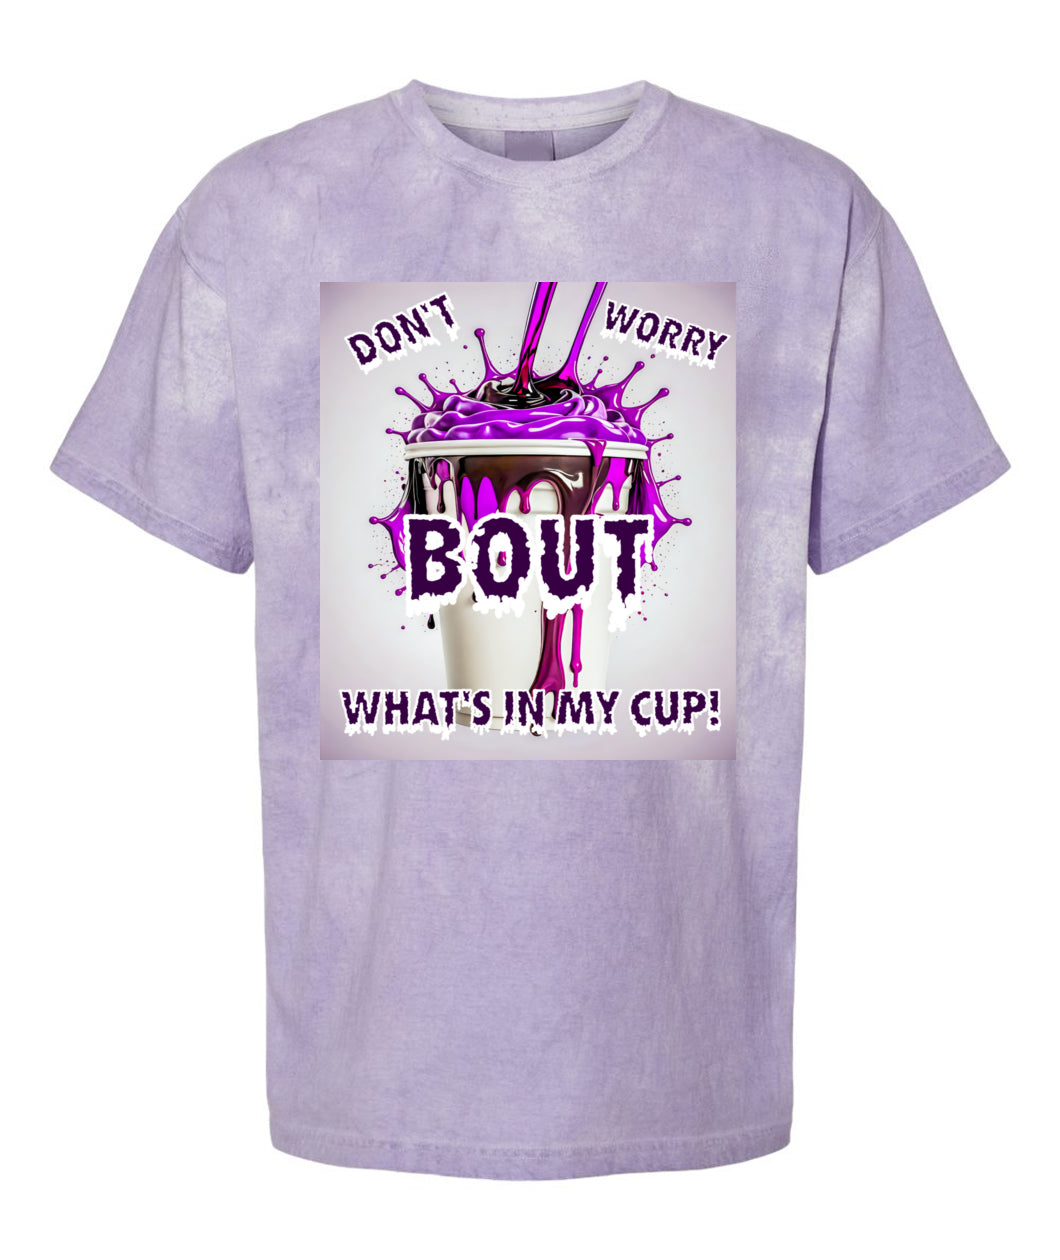 Purple Syrup Cup Design Unisex Blast T-Shirt by Burning Guitars